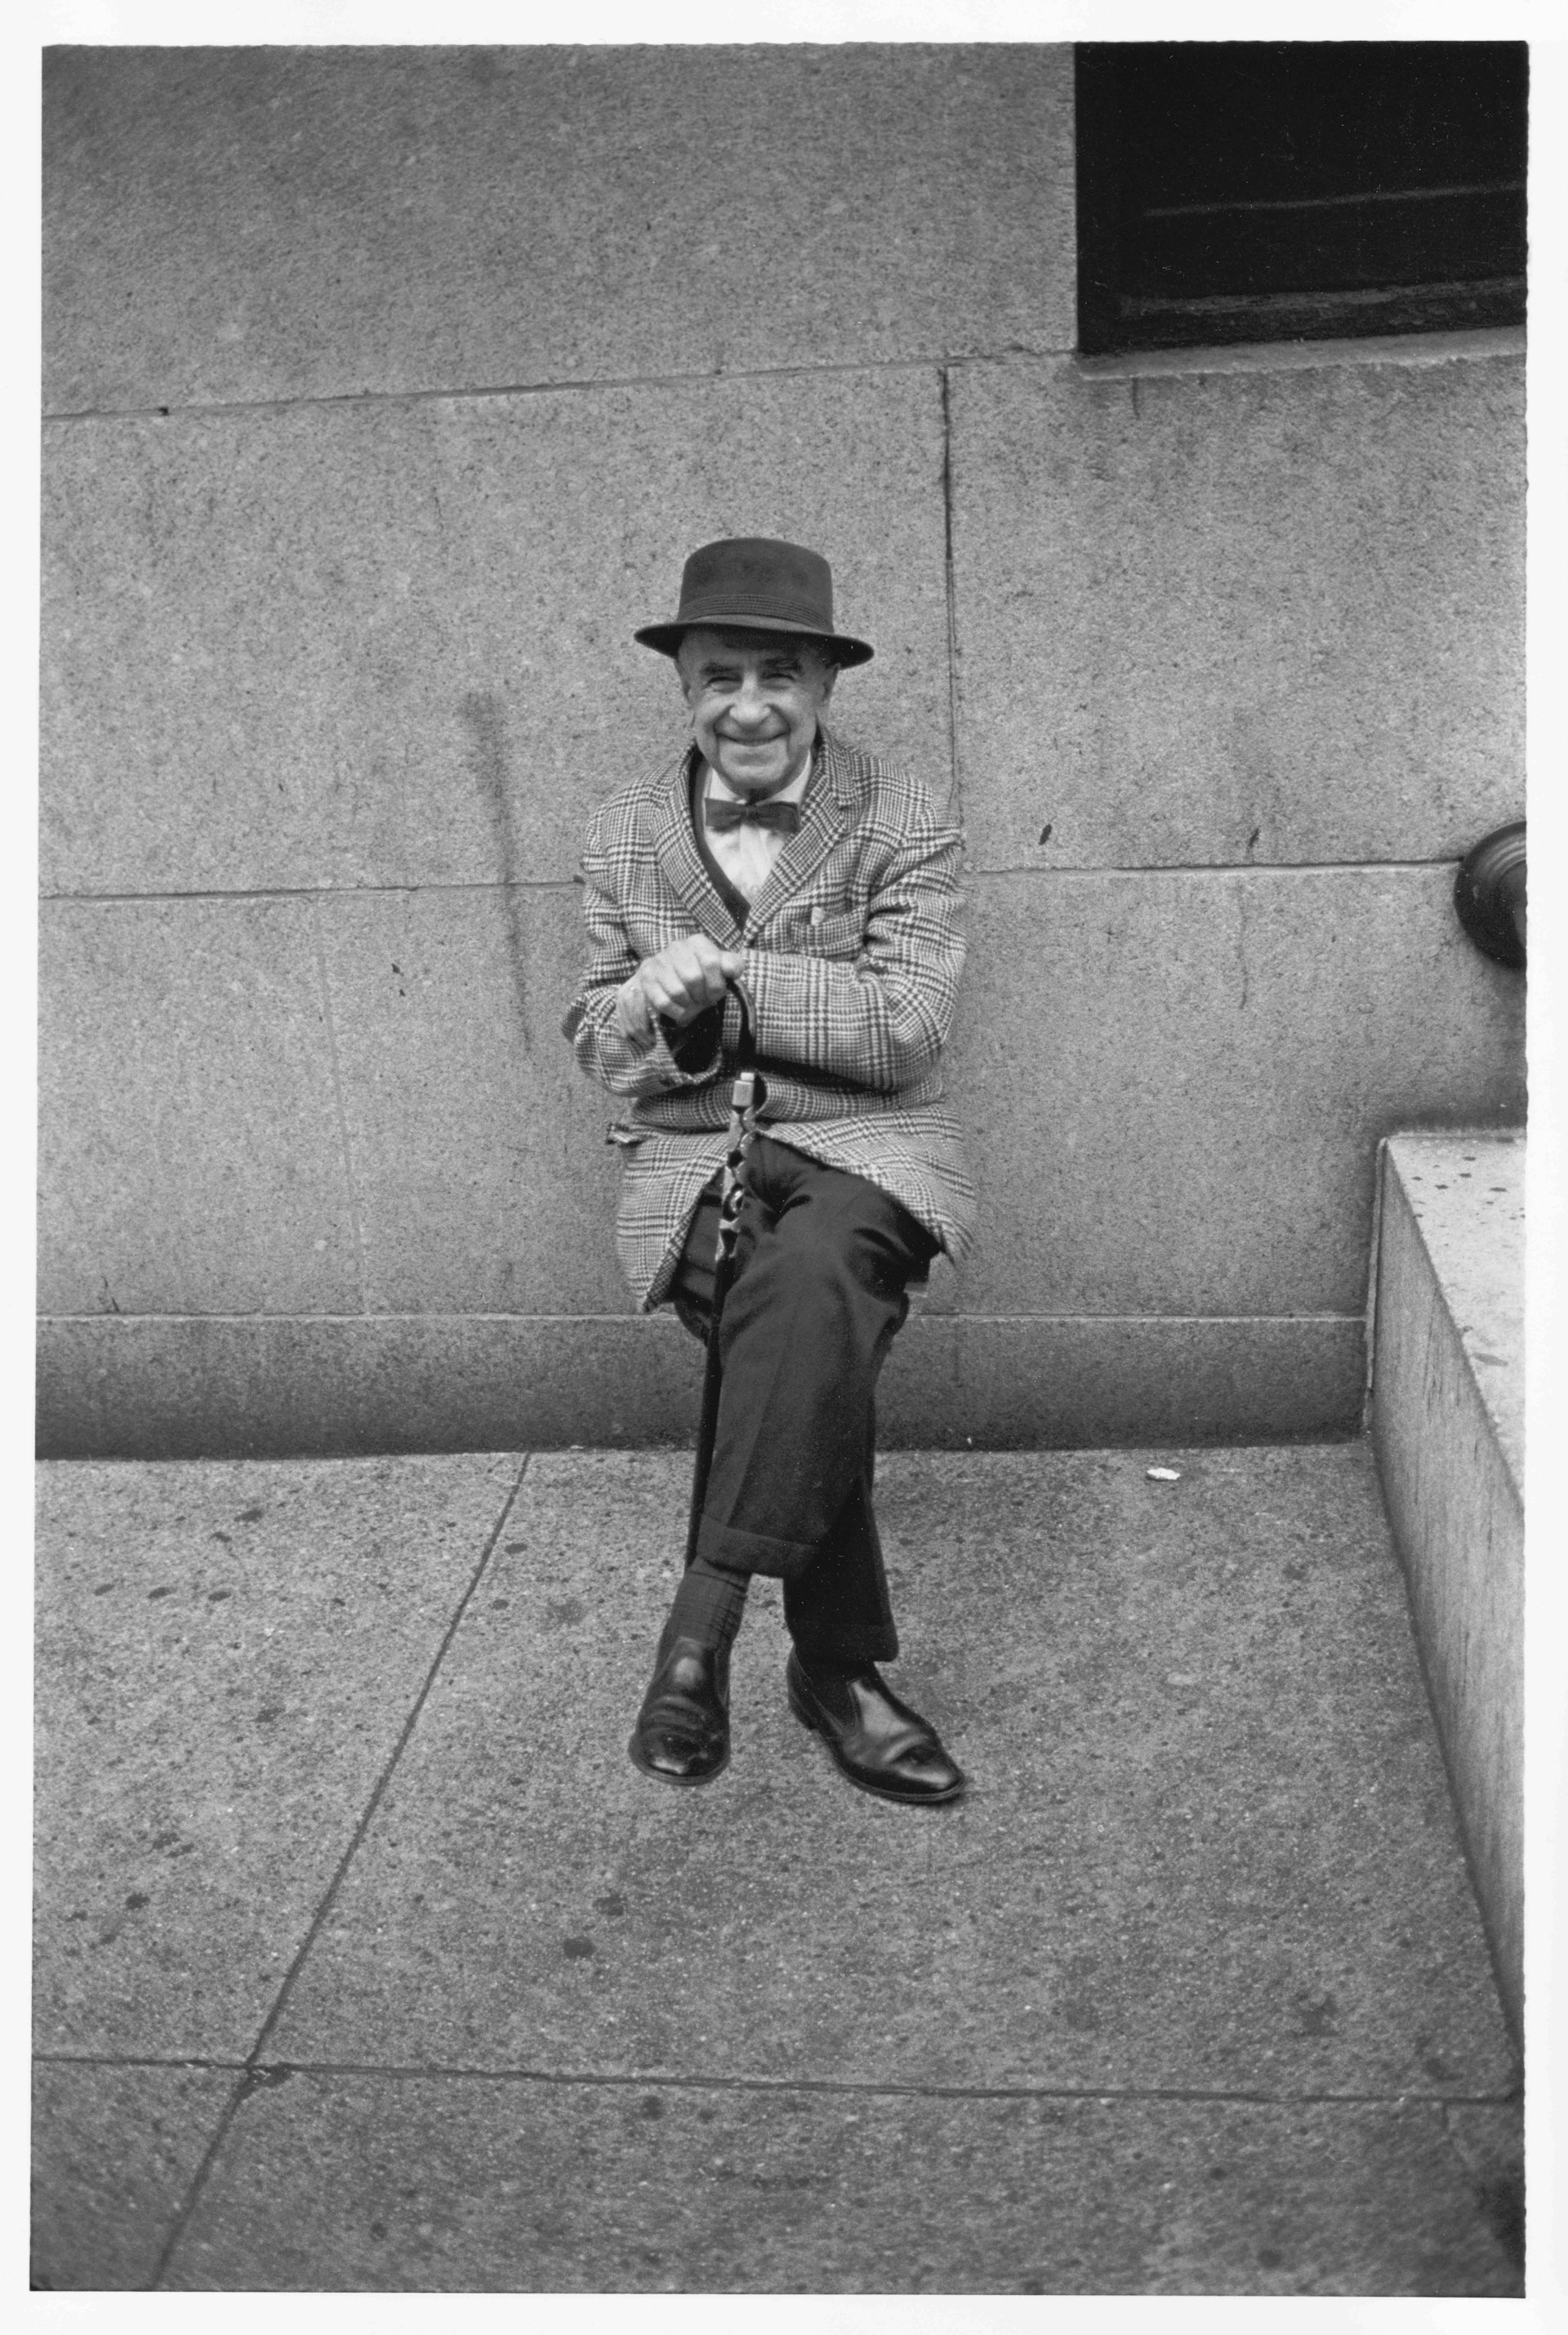 Gentleman resting at the side of a building, 1967